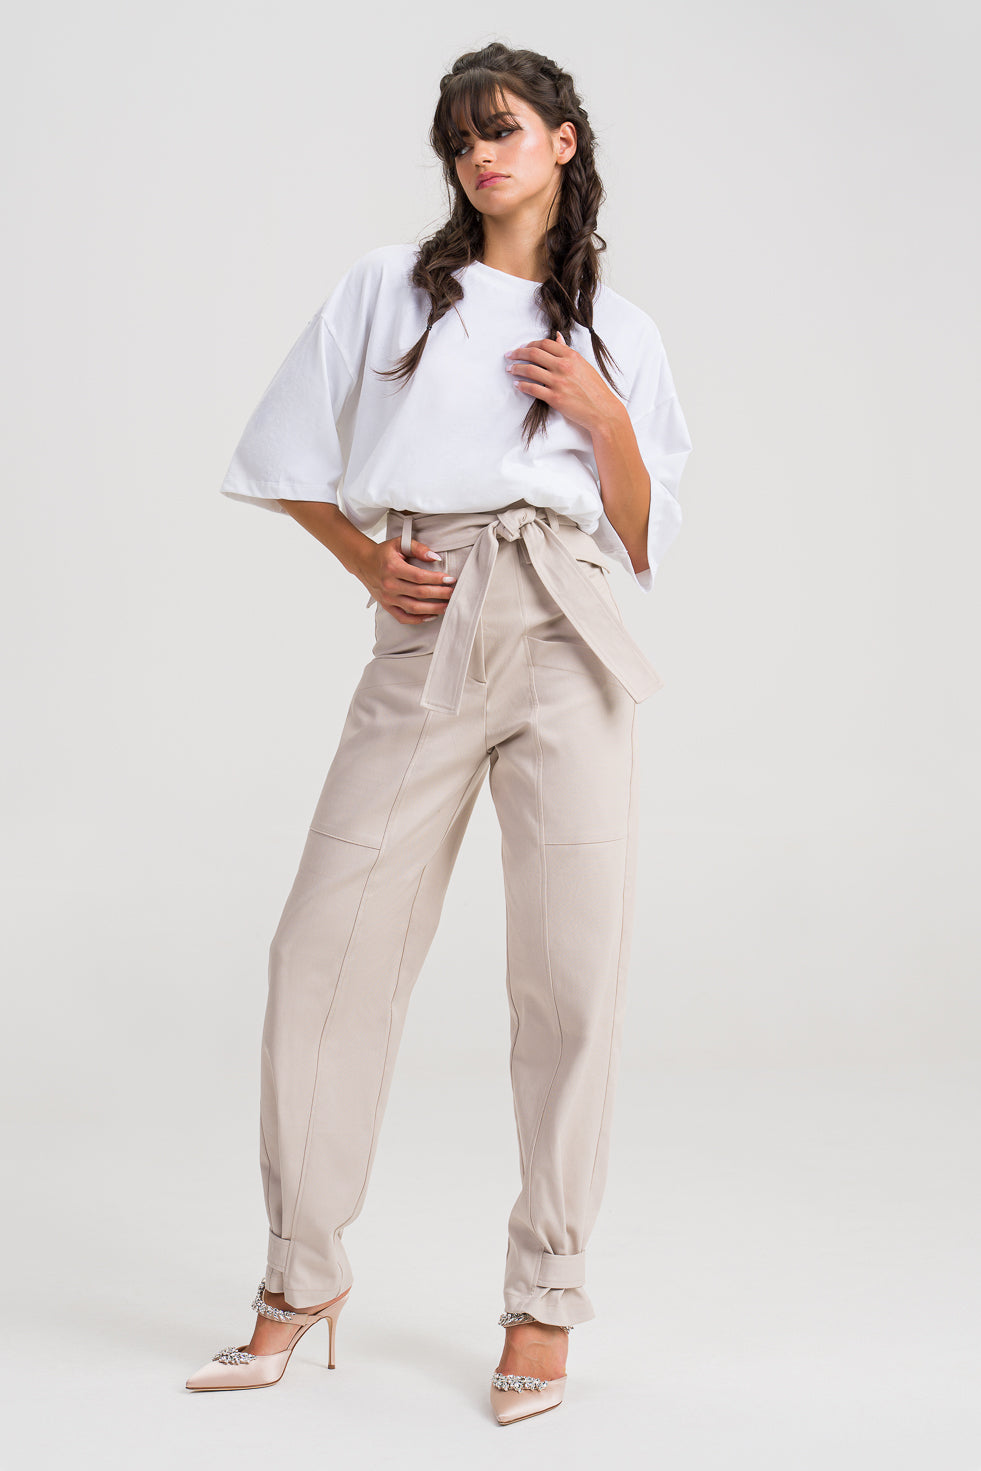 ‘Ava‘ Beige Tapered Cargo Pants